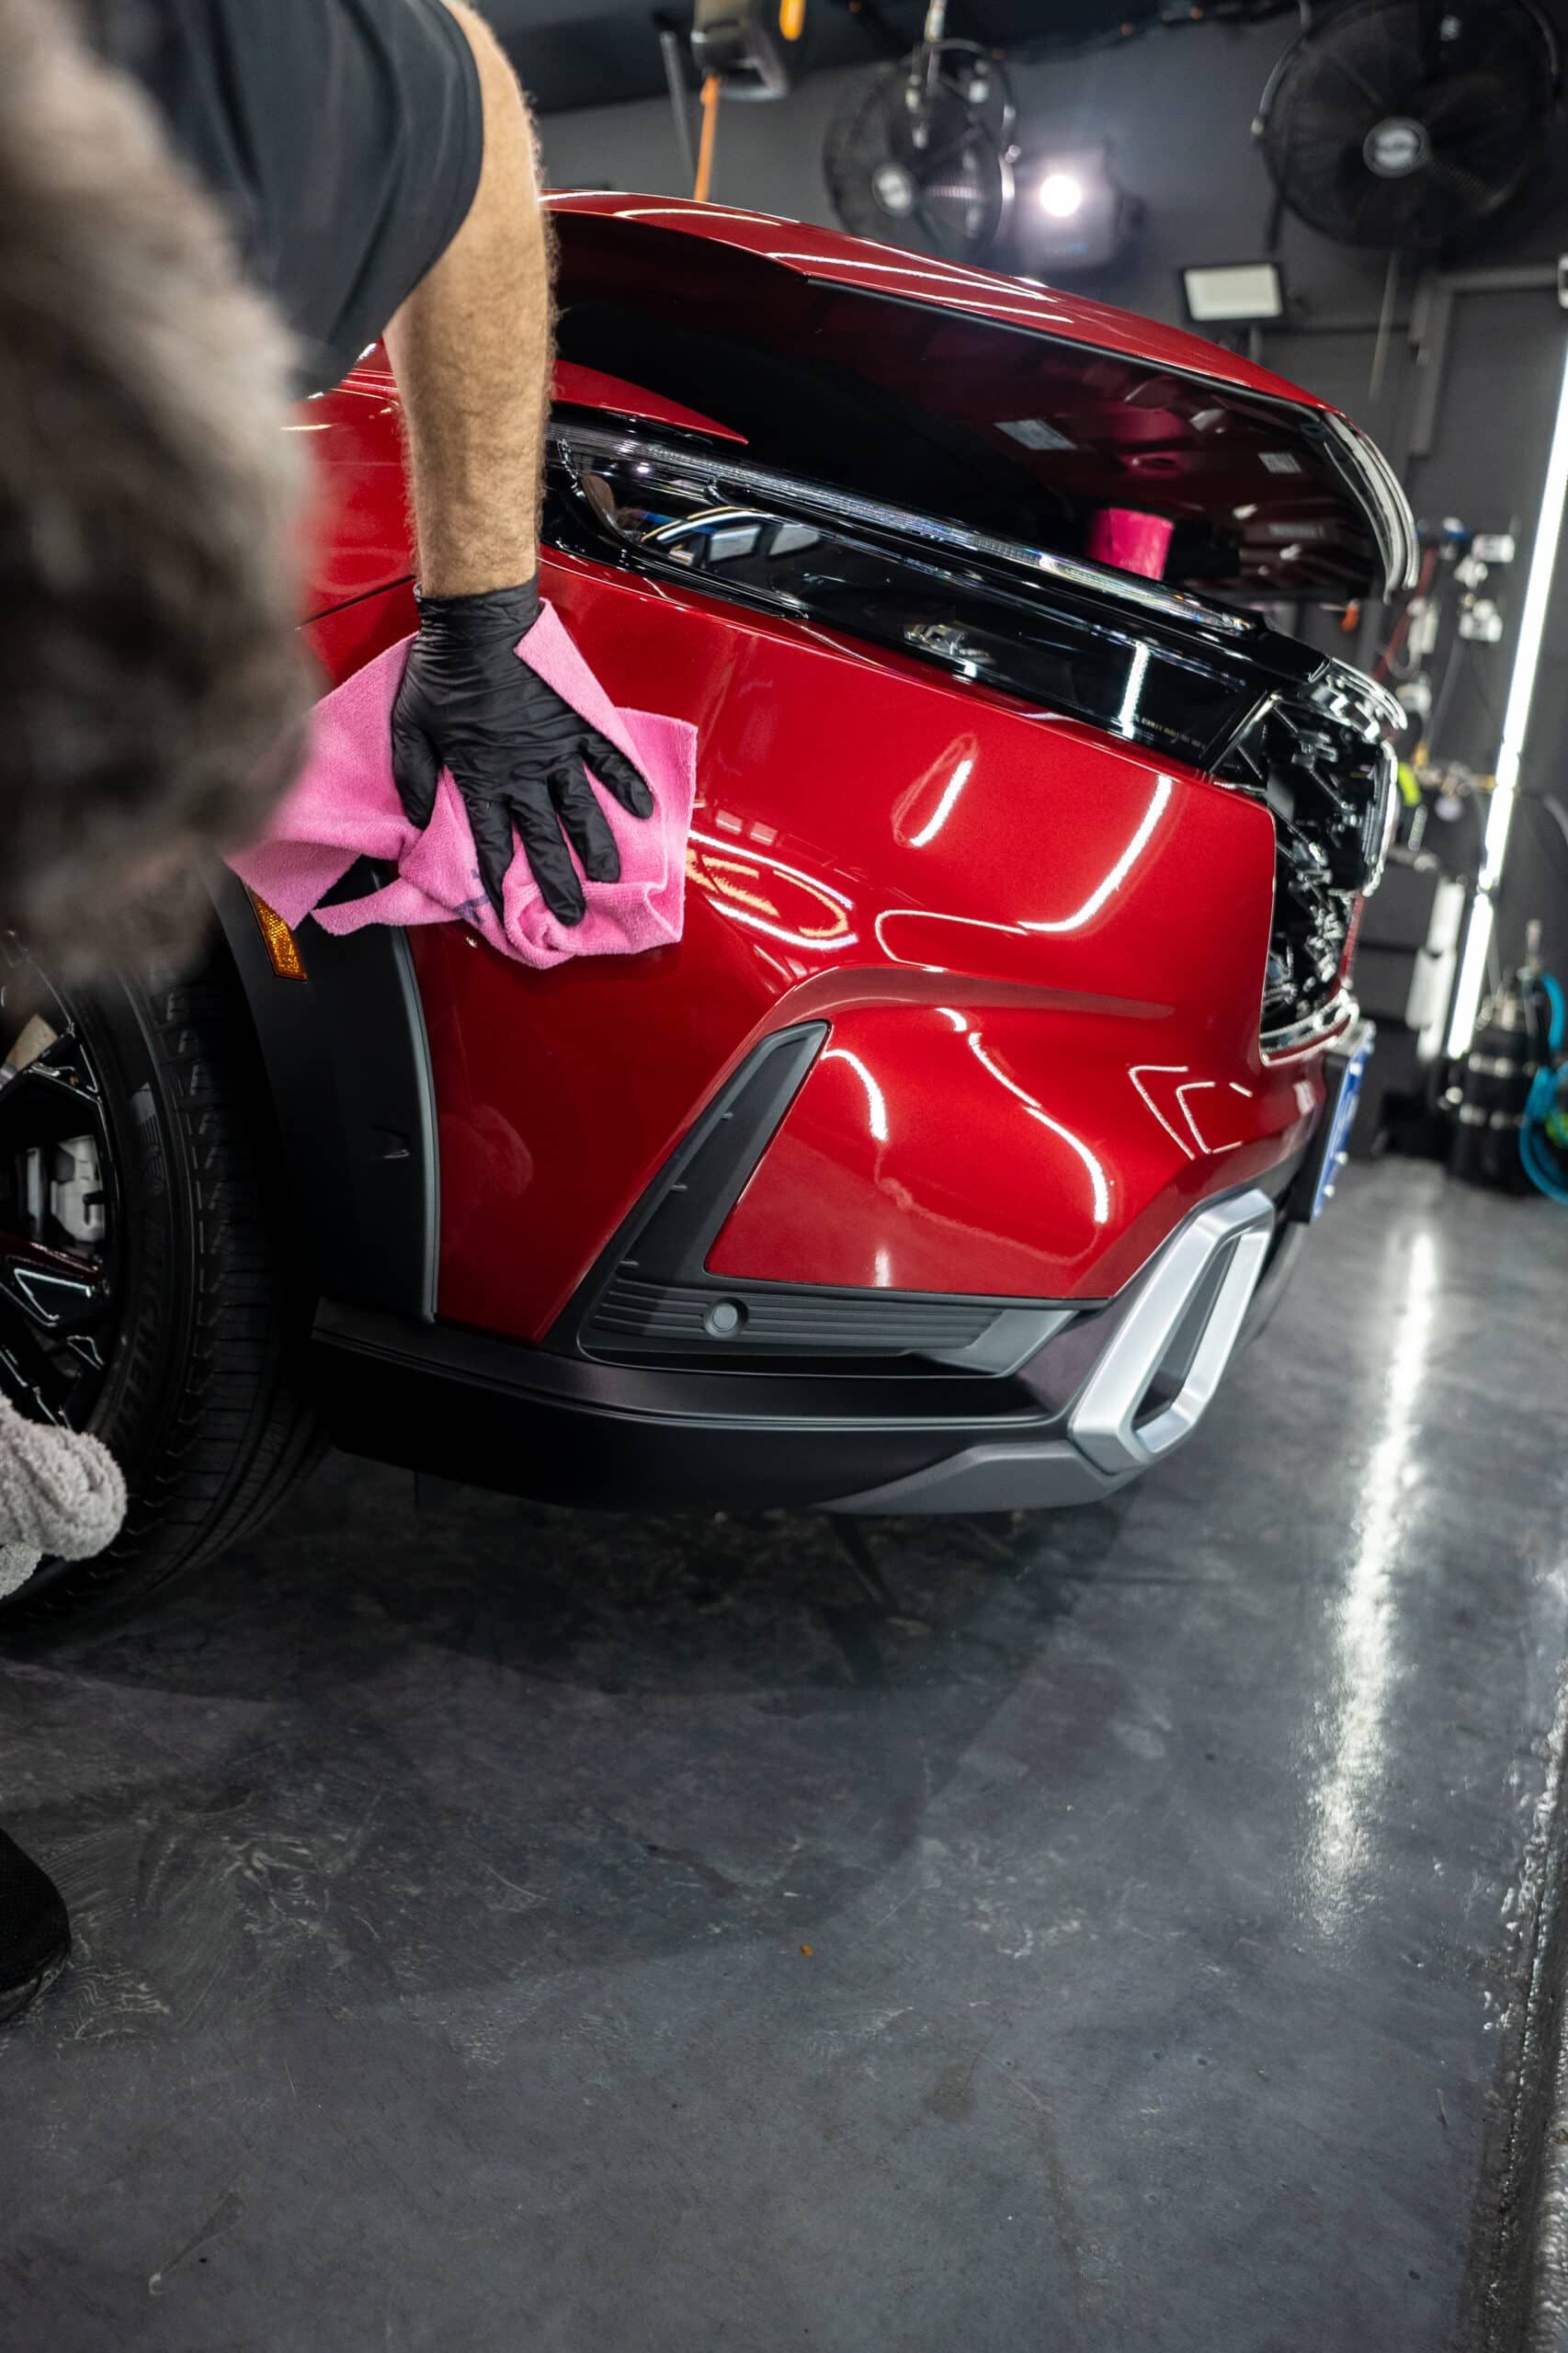 A man is cleaning a red car with a towel in a garage.